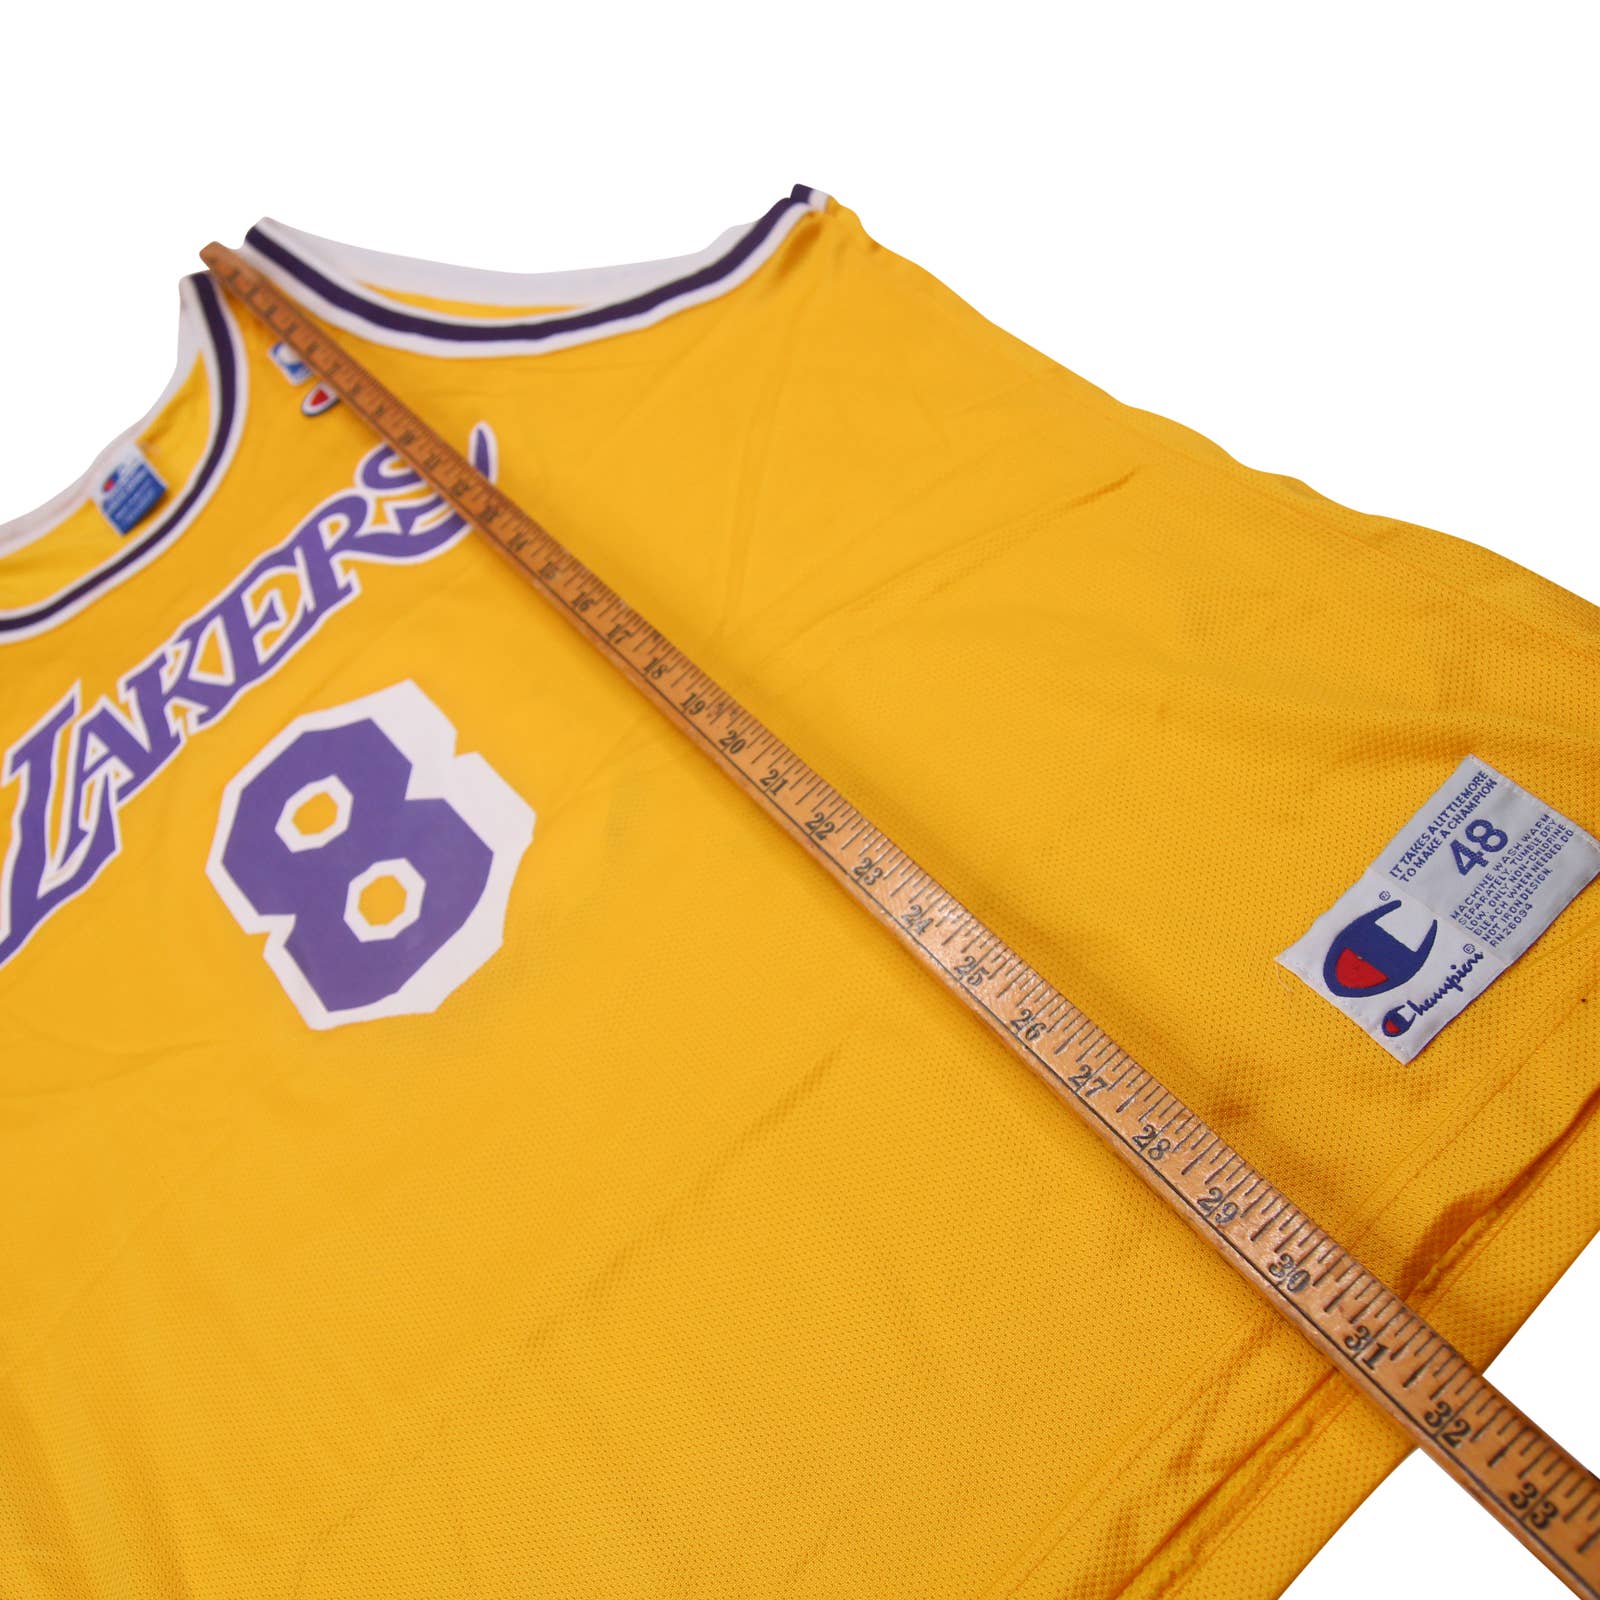 Smoove Hair Gallery Vtg Youth Champion NBA Los Angeles Lakers Kobe Bryant #8 Rookie Year Jersey